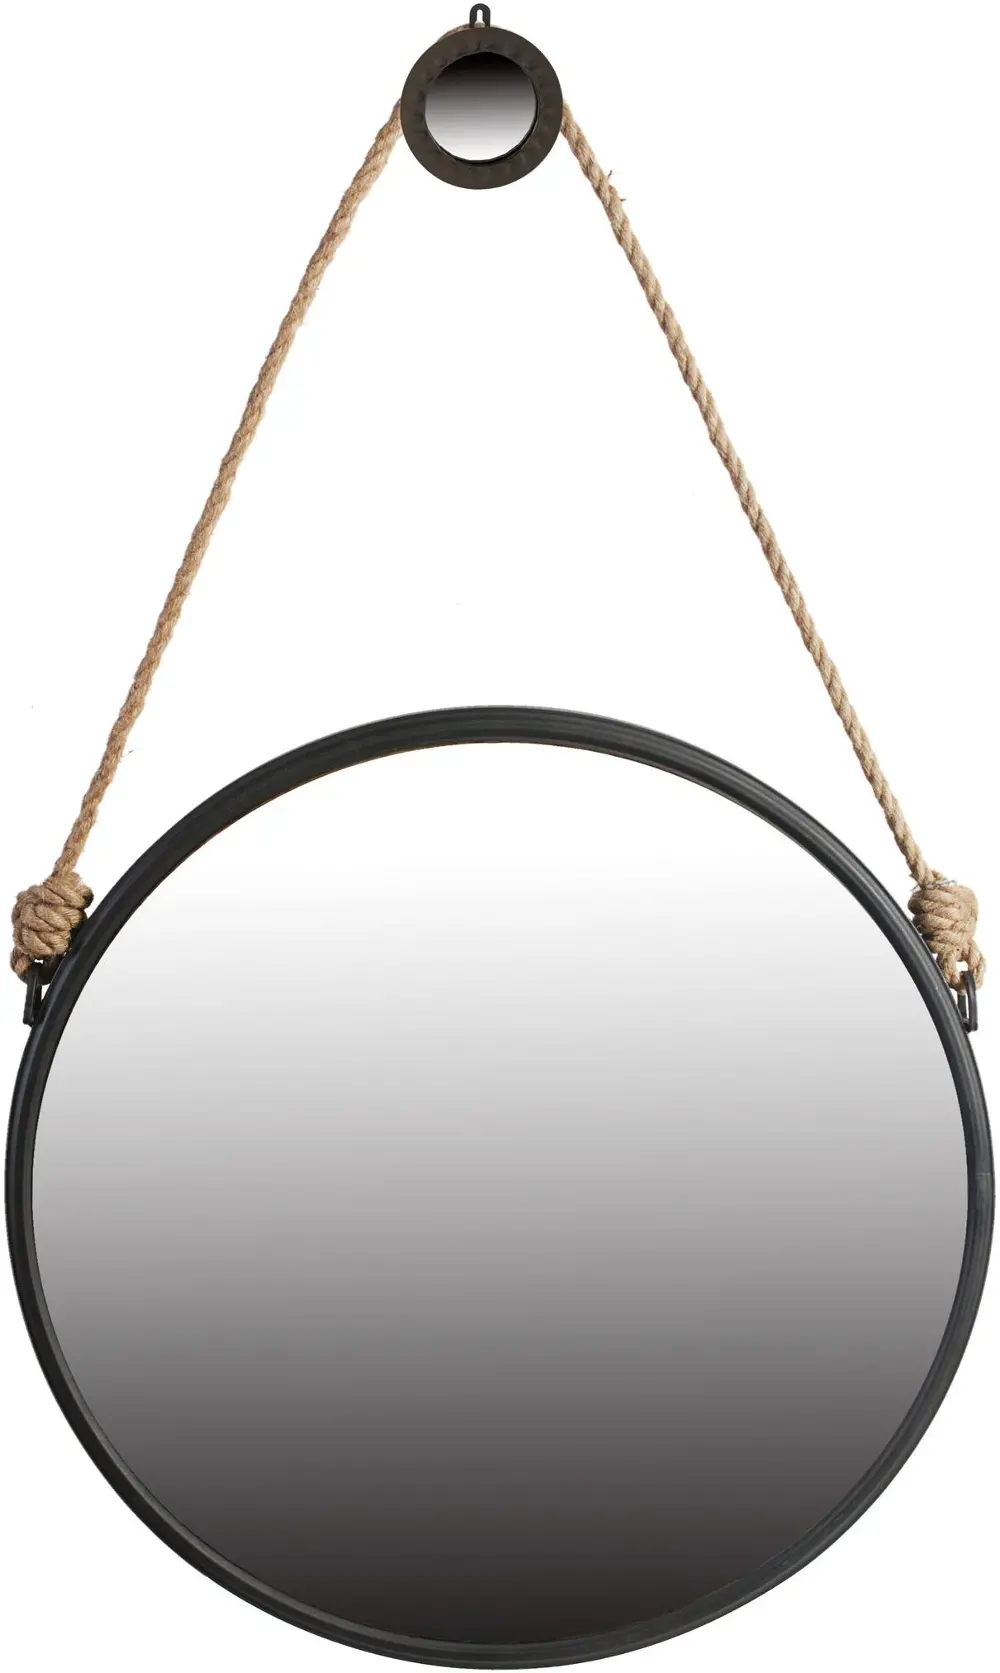 29 Inch Hanging Round Mirror with Rope-1